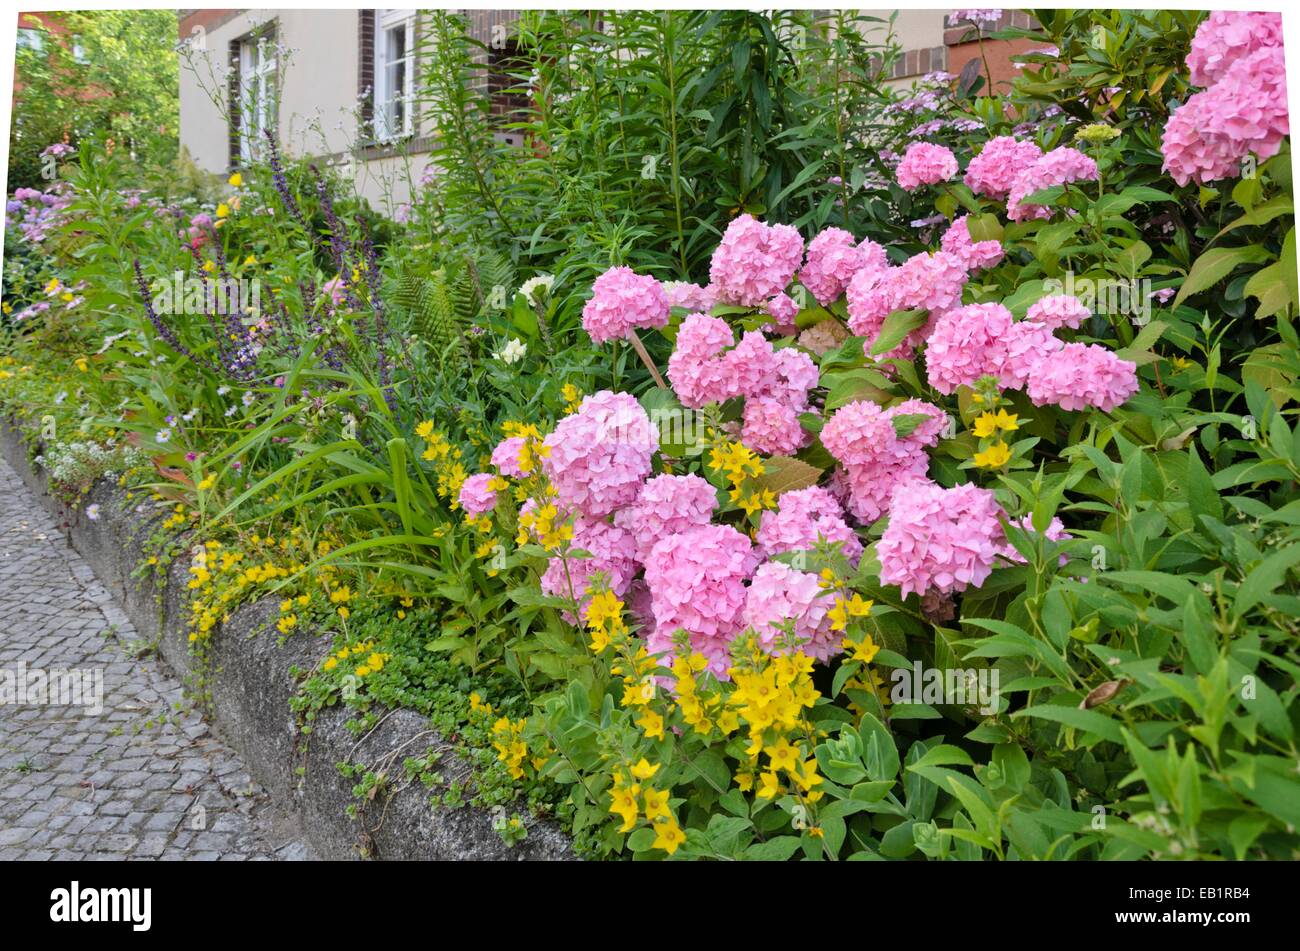 Hydrangea (Hydrangea) and dotted loosestrife (Lysimachia punctata) in the front garden of an apartment building Stock Photo